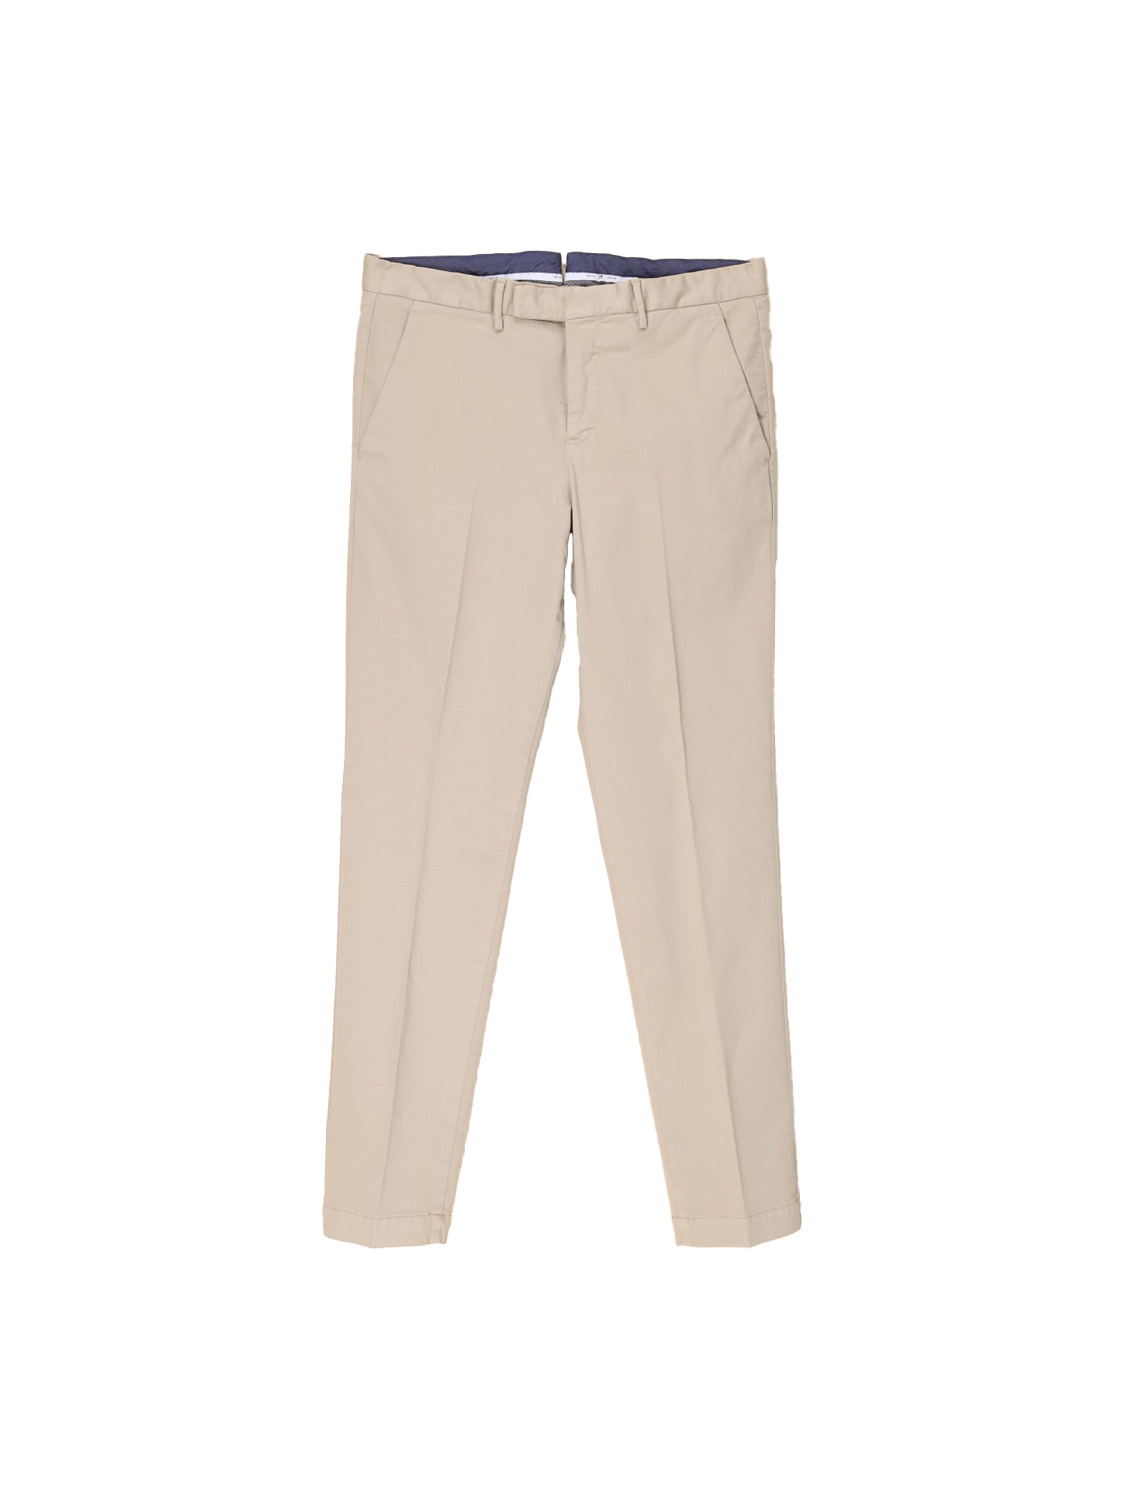 PT Torino Stretchy cotton trousers in chino style  beige 46